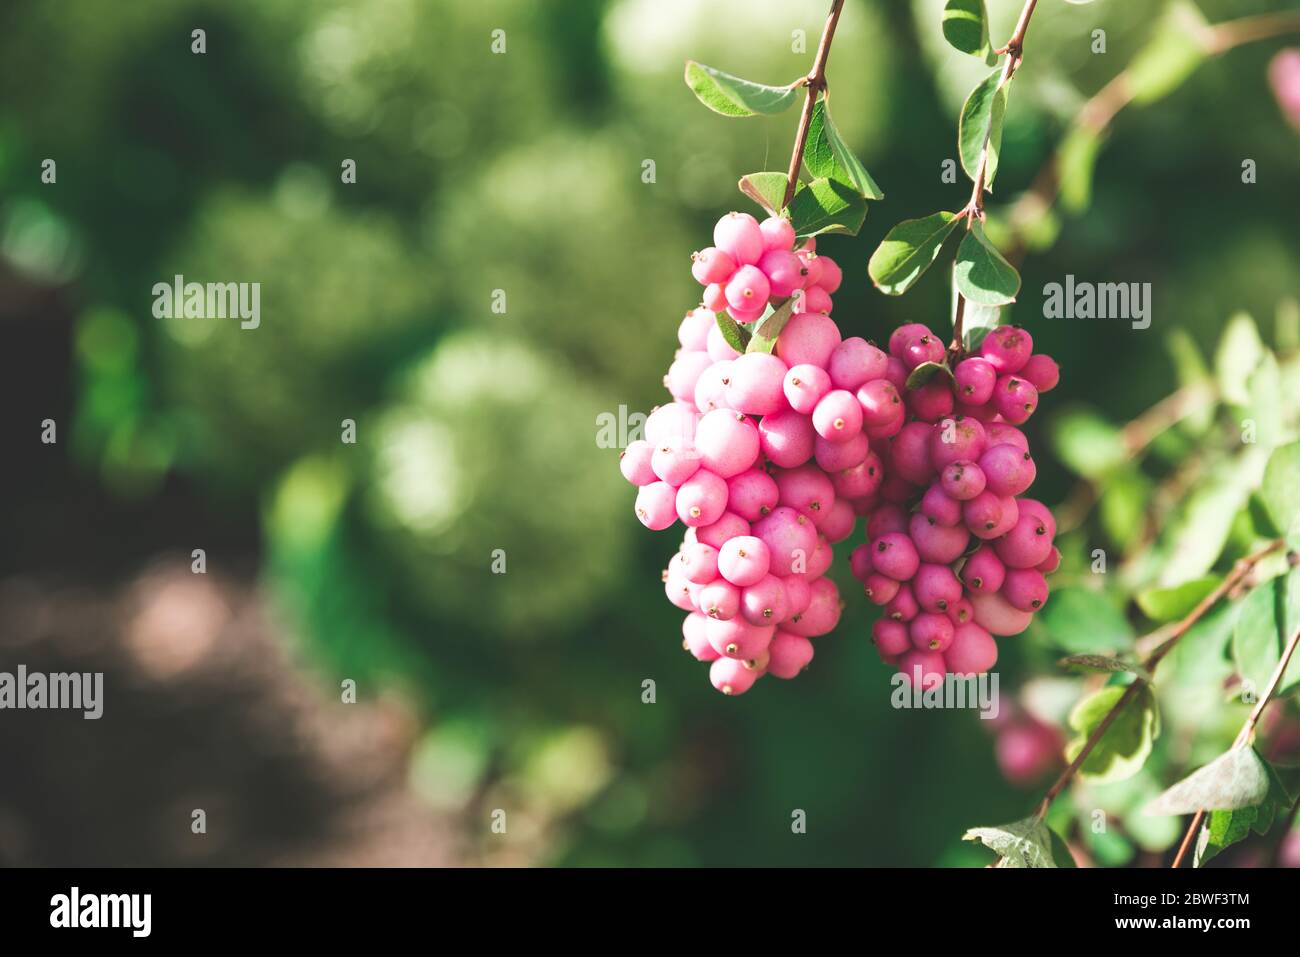 Summer garden in sunshine with blooming Symphoricarpos plant, known as snowberry, waxberry, or ghostberry Stock Photo